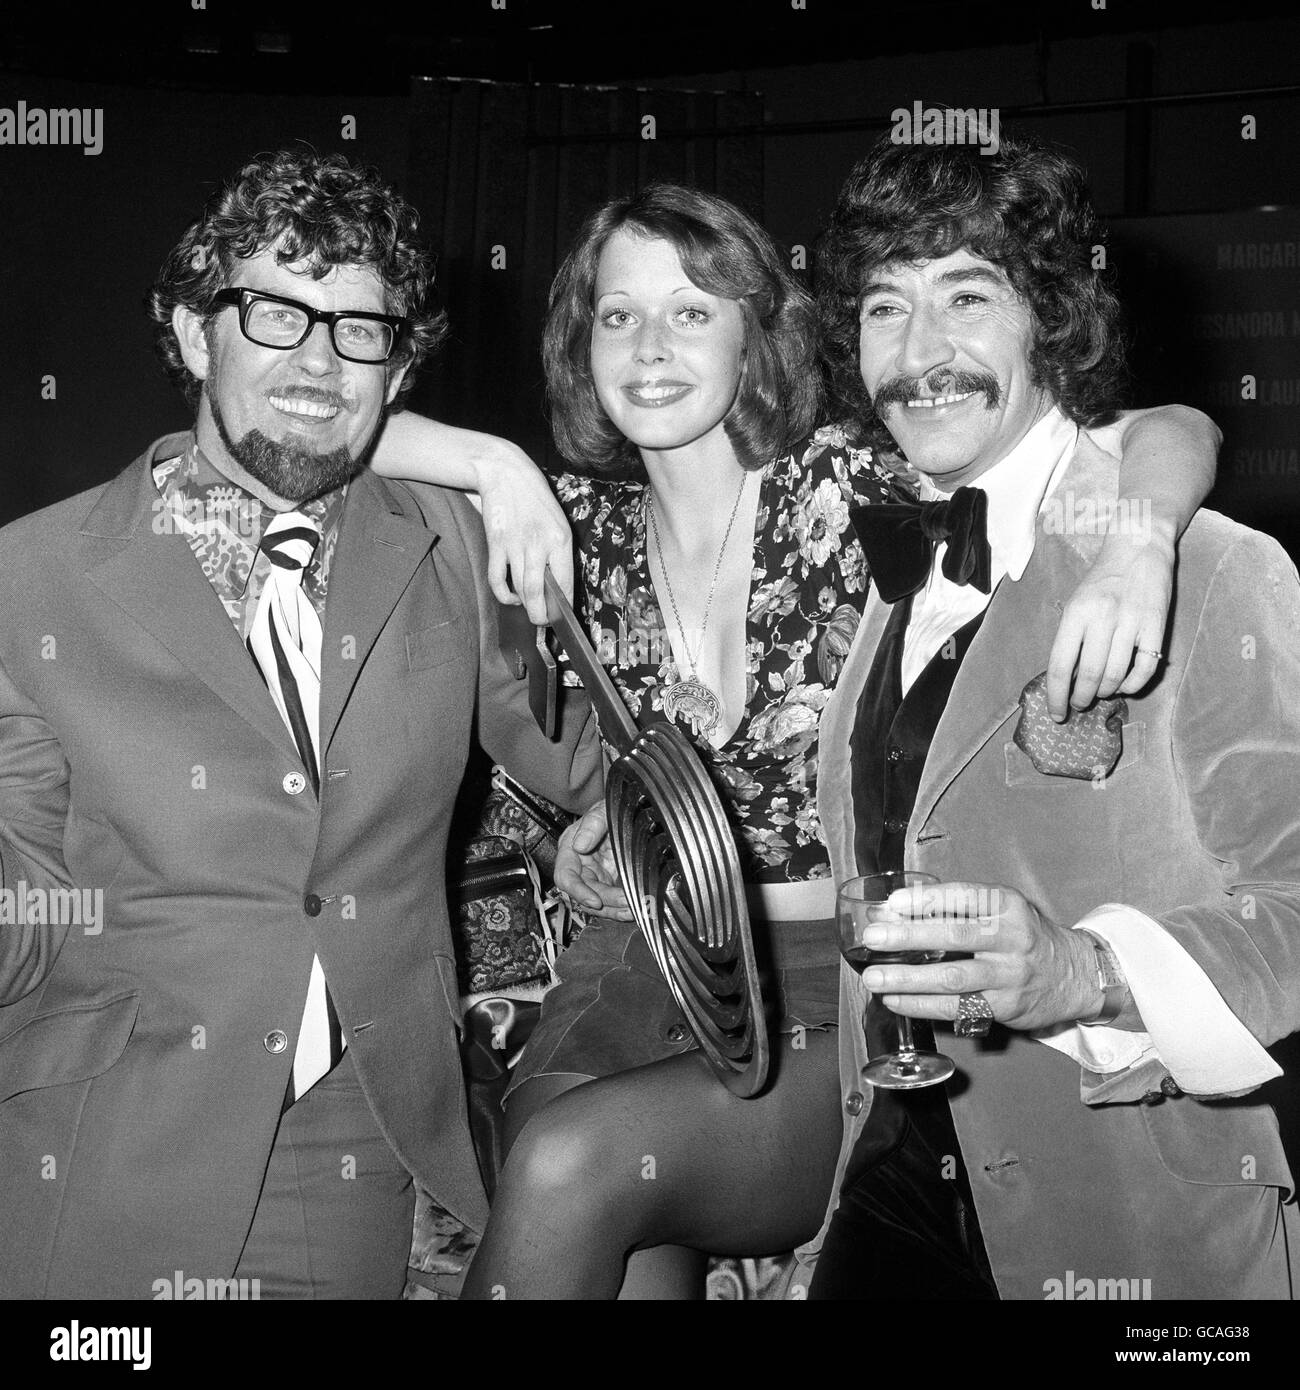 An Australian gets into the Common Market act. Television entertainer Rolf Harris (left) and actor Peter Wyngarde ('Jason King') flank Miss TV Europe 1973, after her election at ATV's Elstree Studios here tonight. Stock Photo